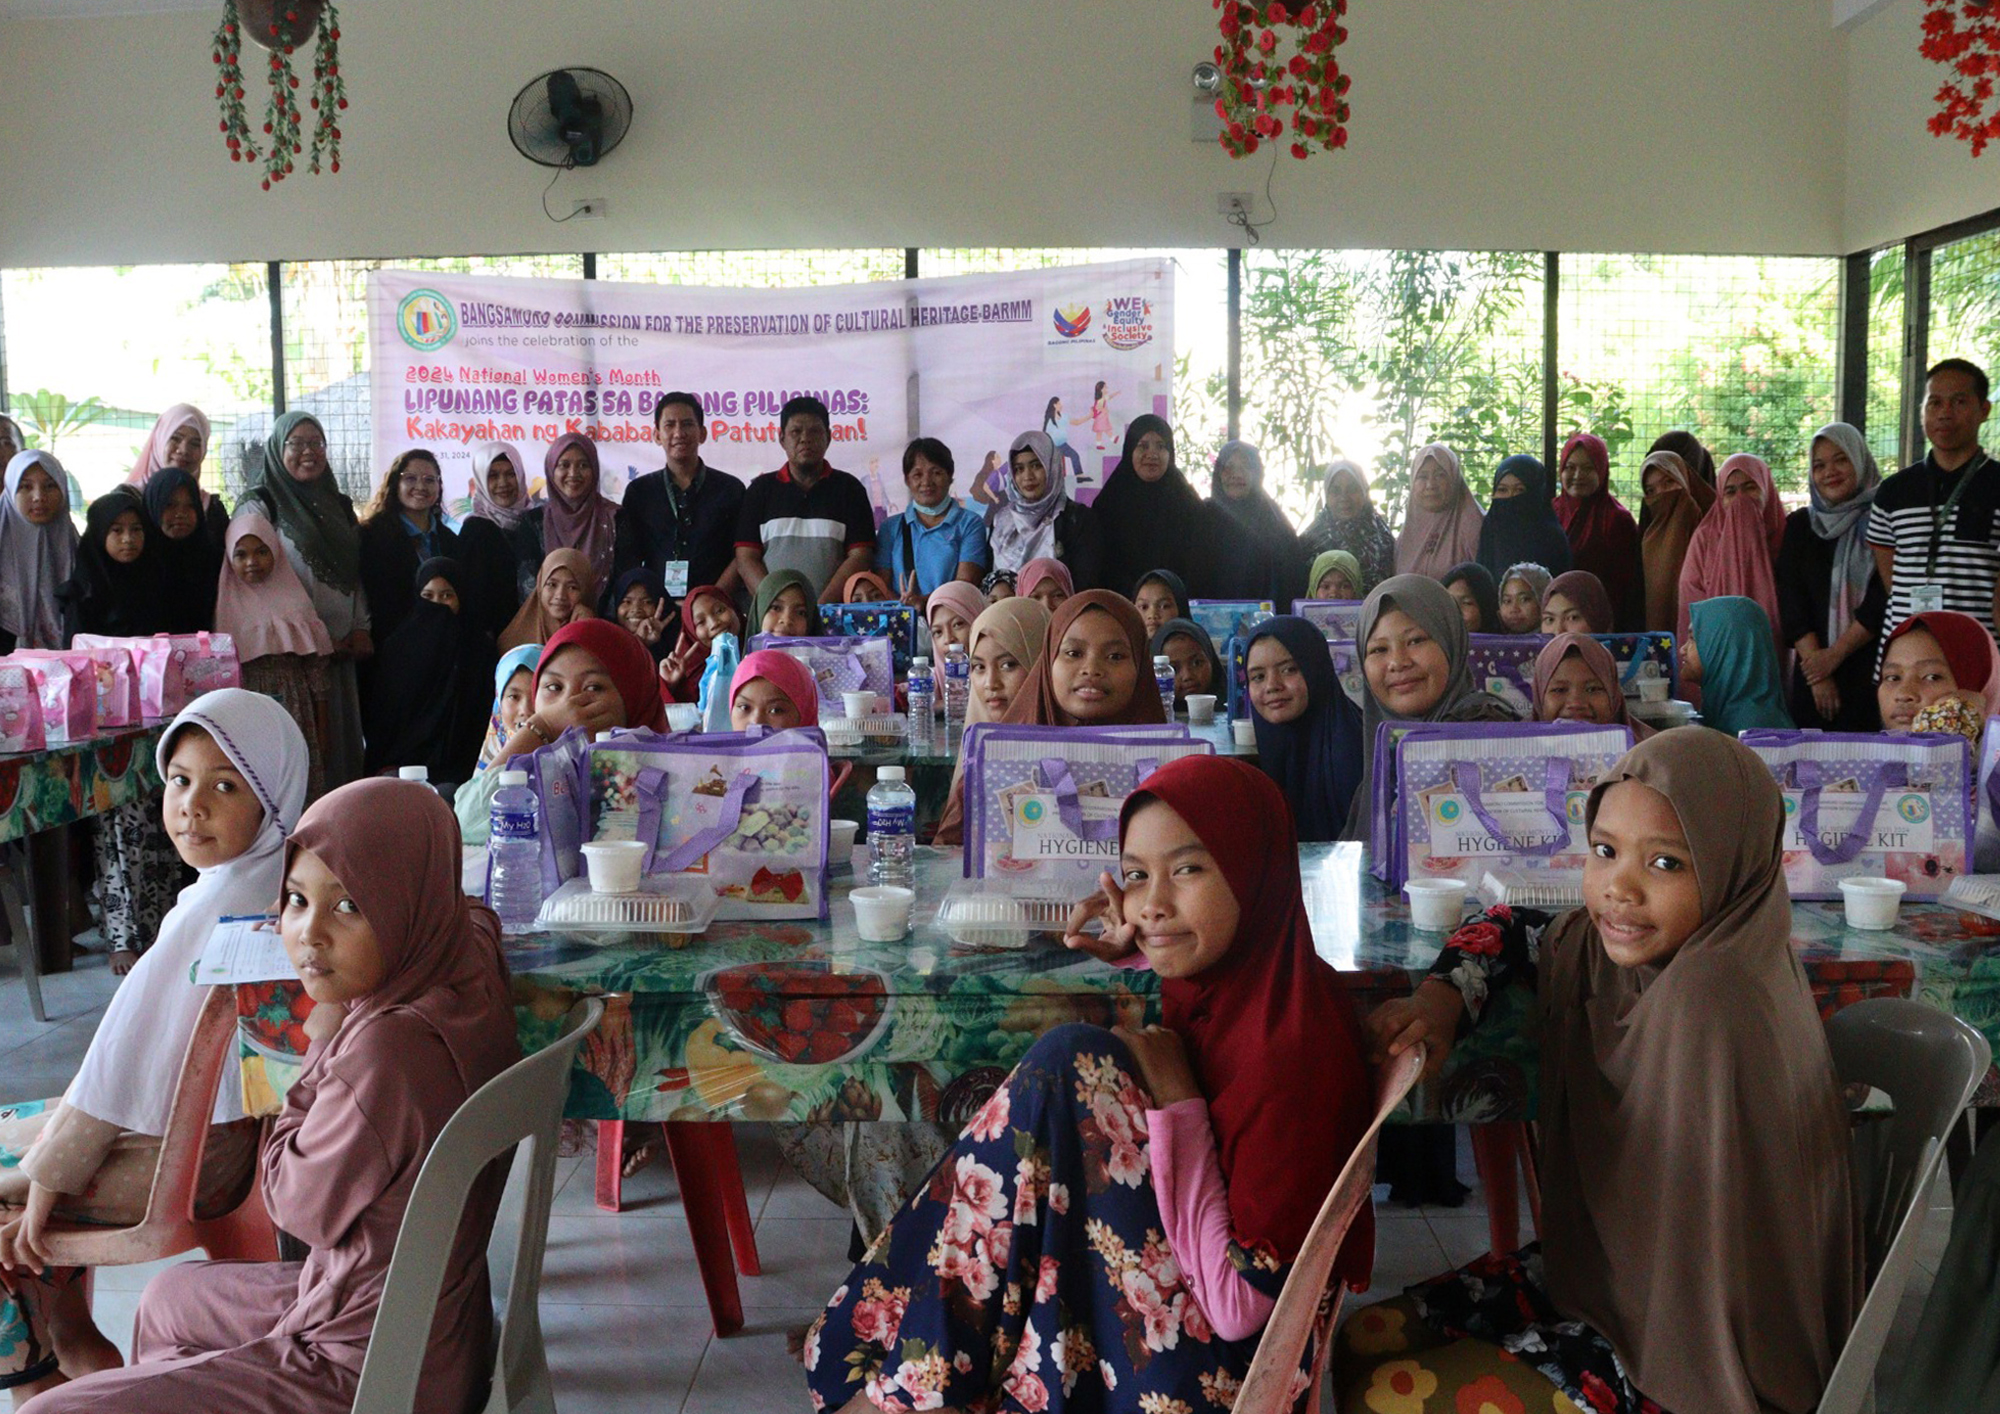 BCPCH caters to more than 60 Bangsamoro Women Orphans for National Women’s Month Celebration